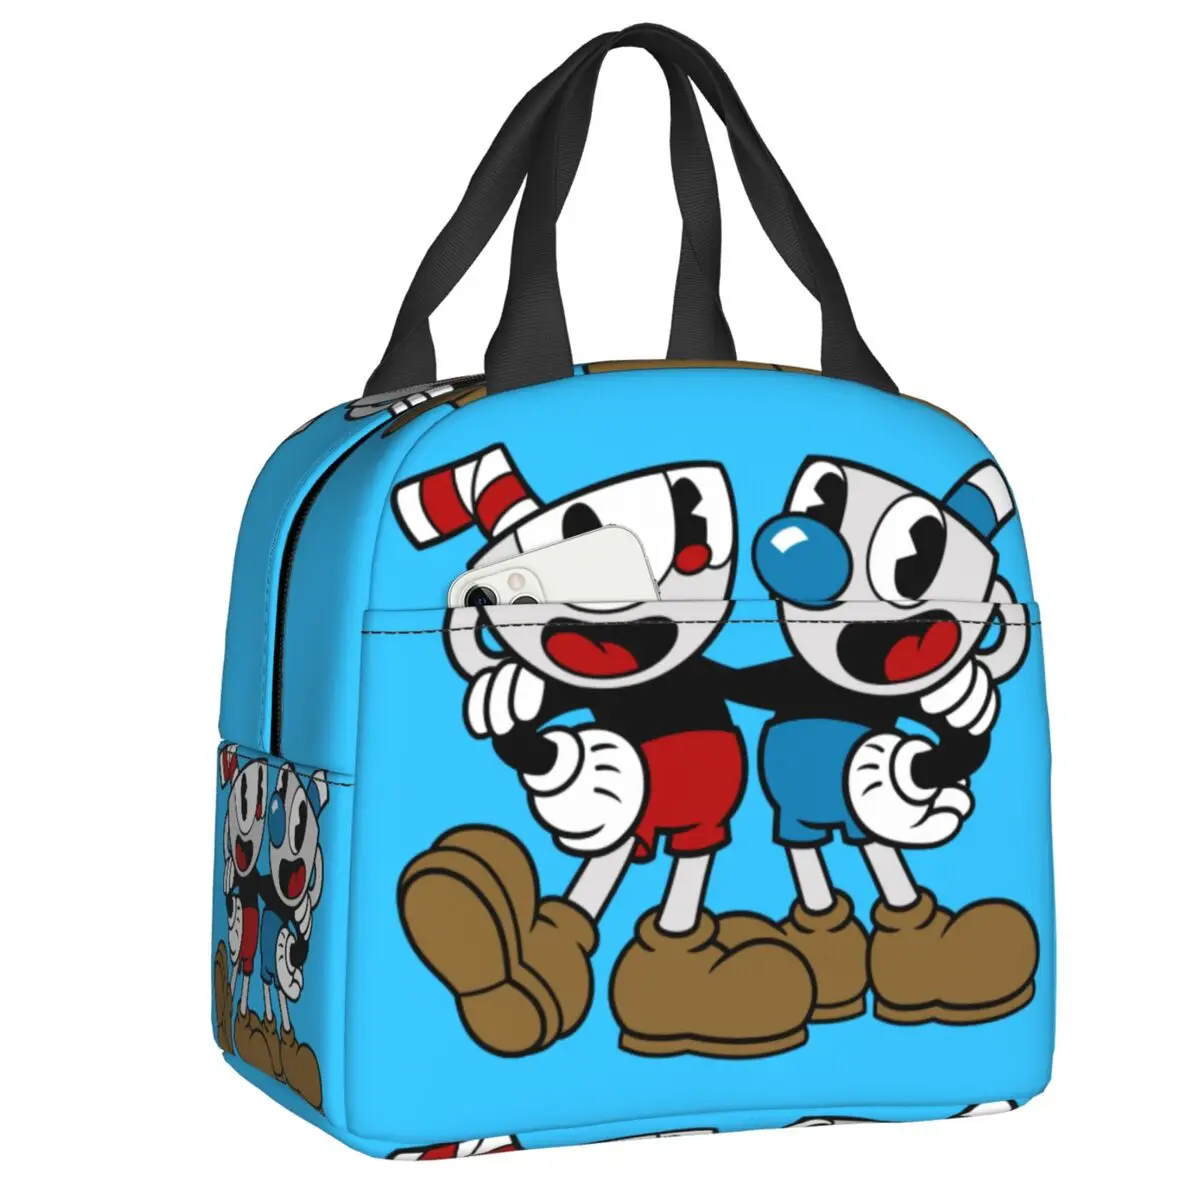 Cuphead And Mugman Dont Deal With The Devil Insulated Lunch Tote Bag for Women Resuable Thermal Cooler Bento Box Travel